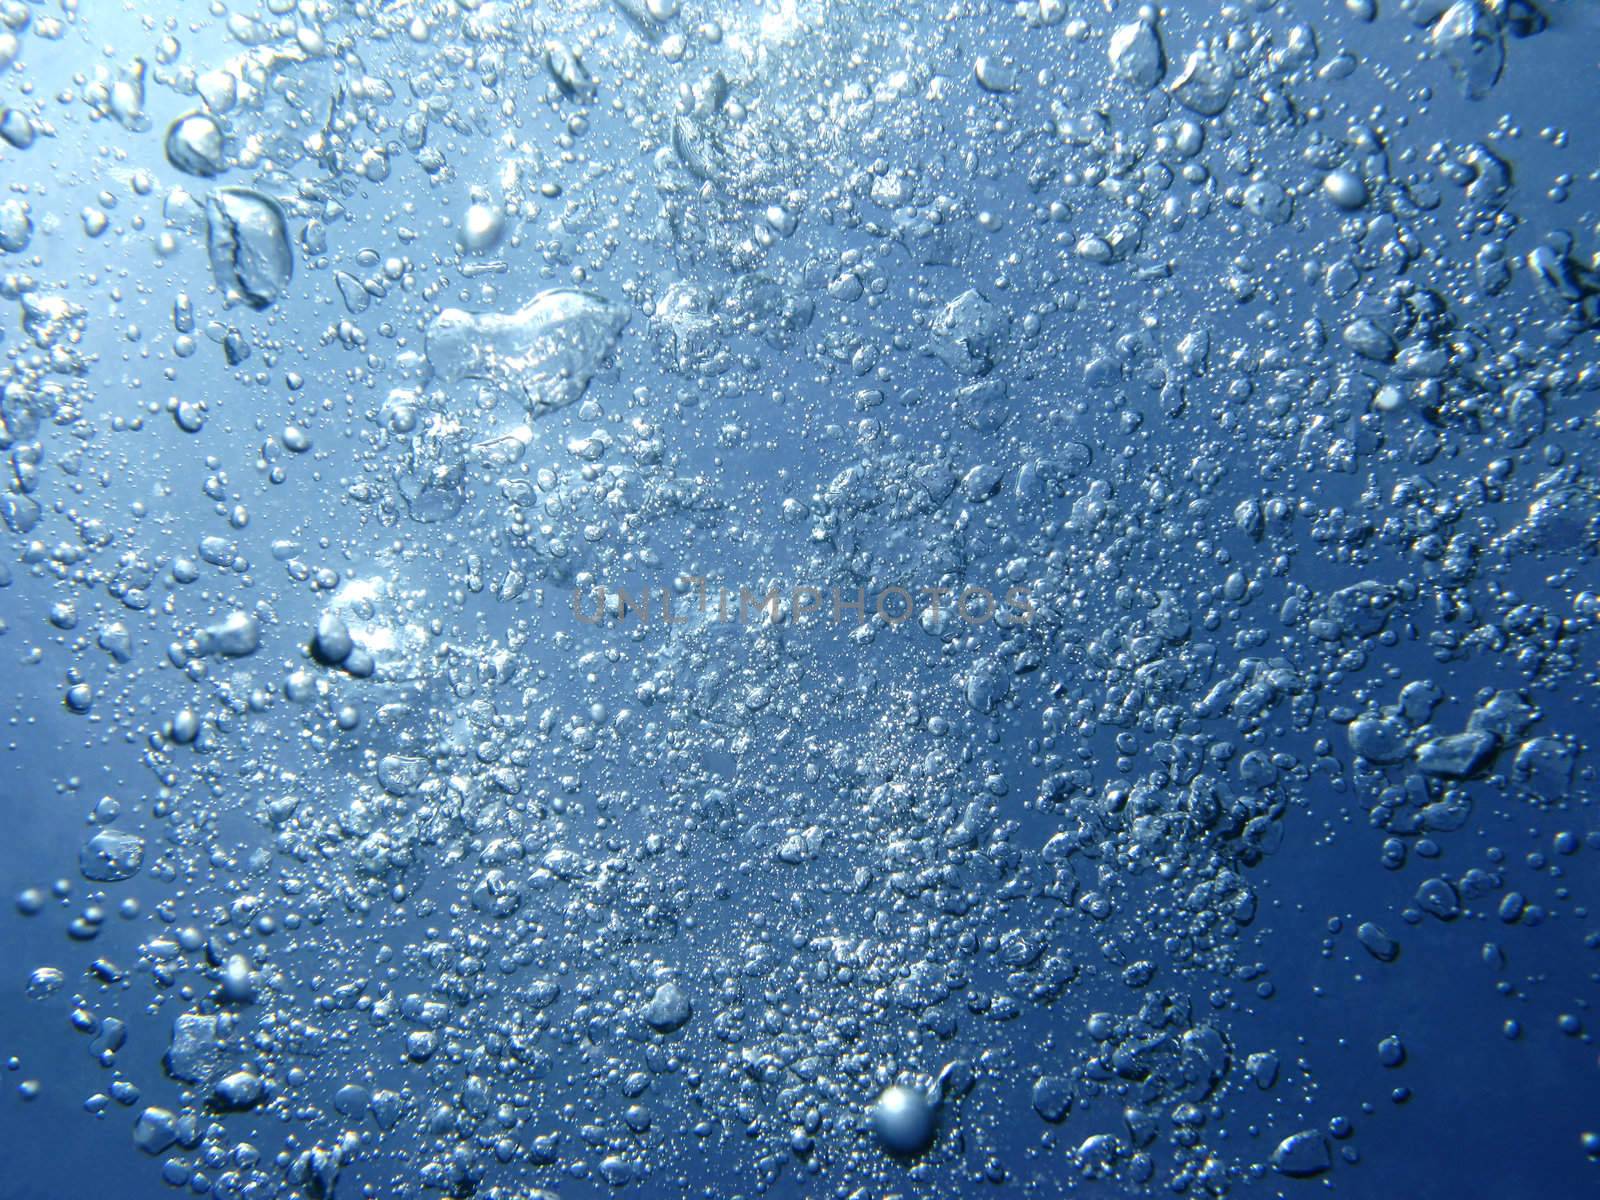 Air bubbles, blue water, abstract background